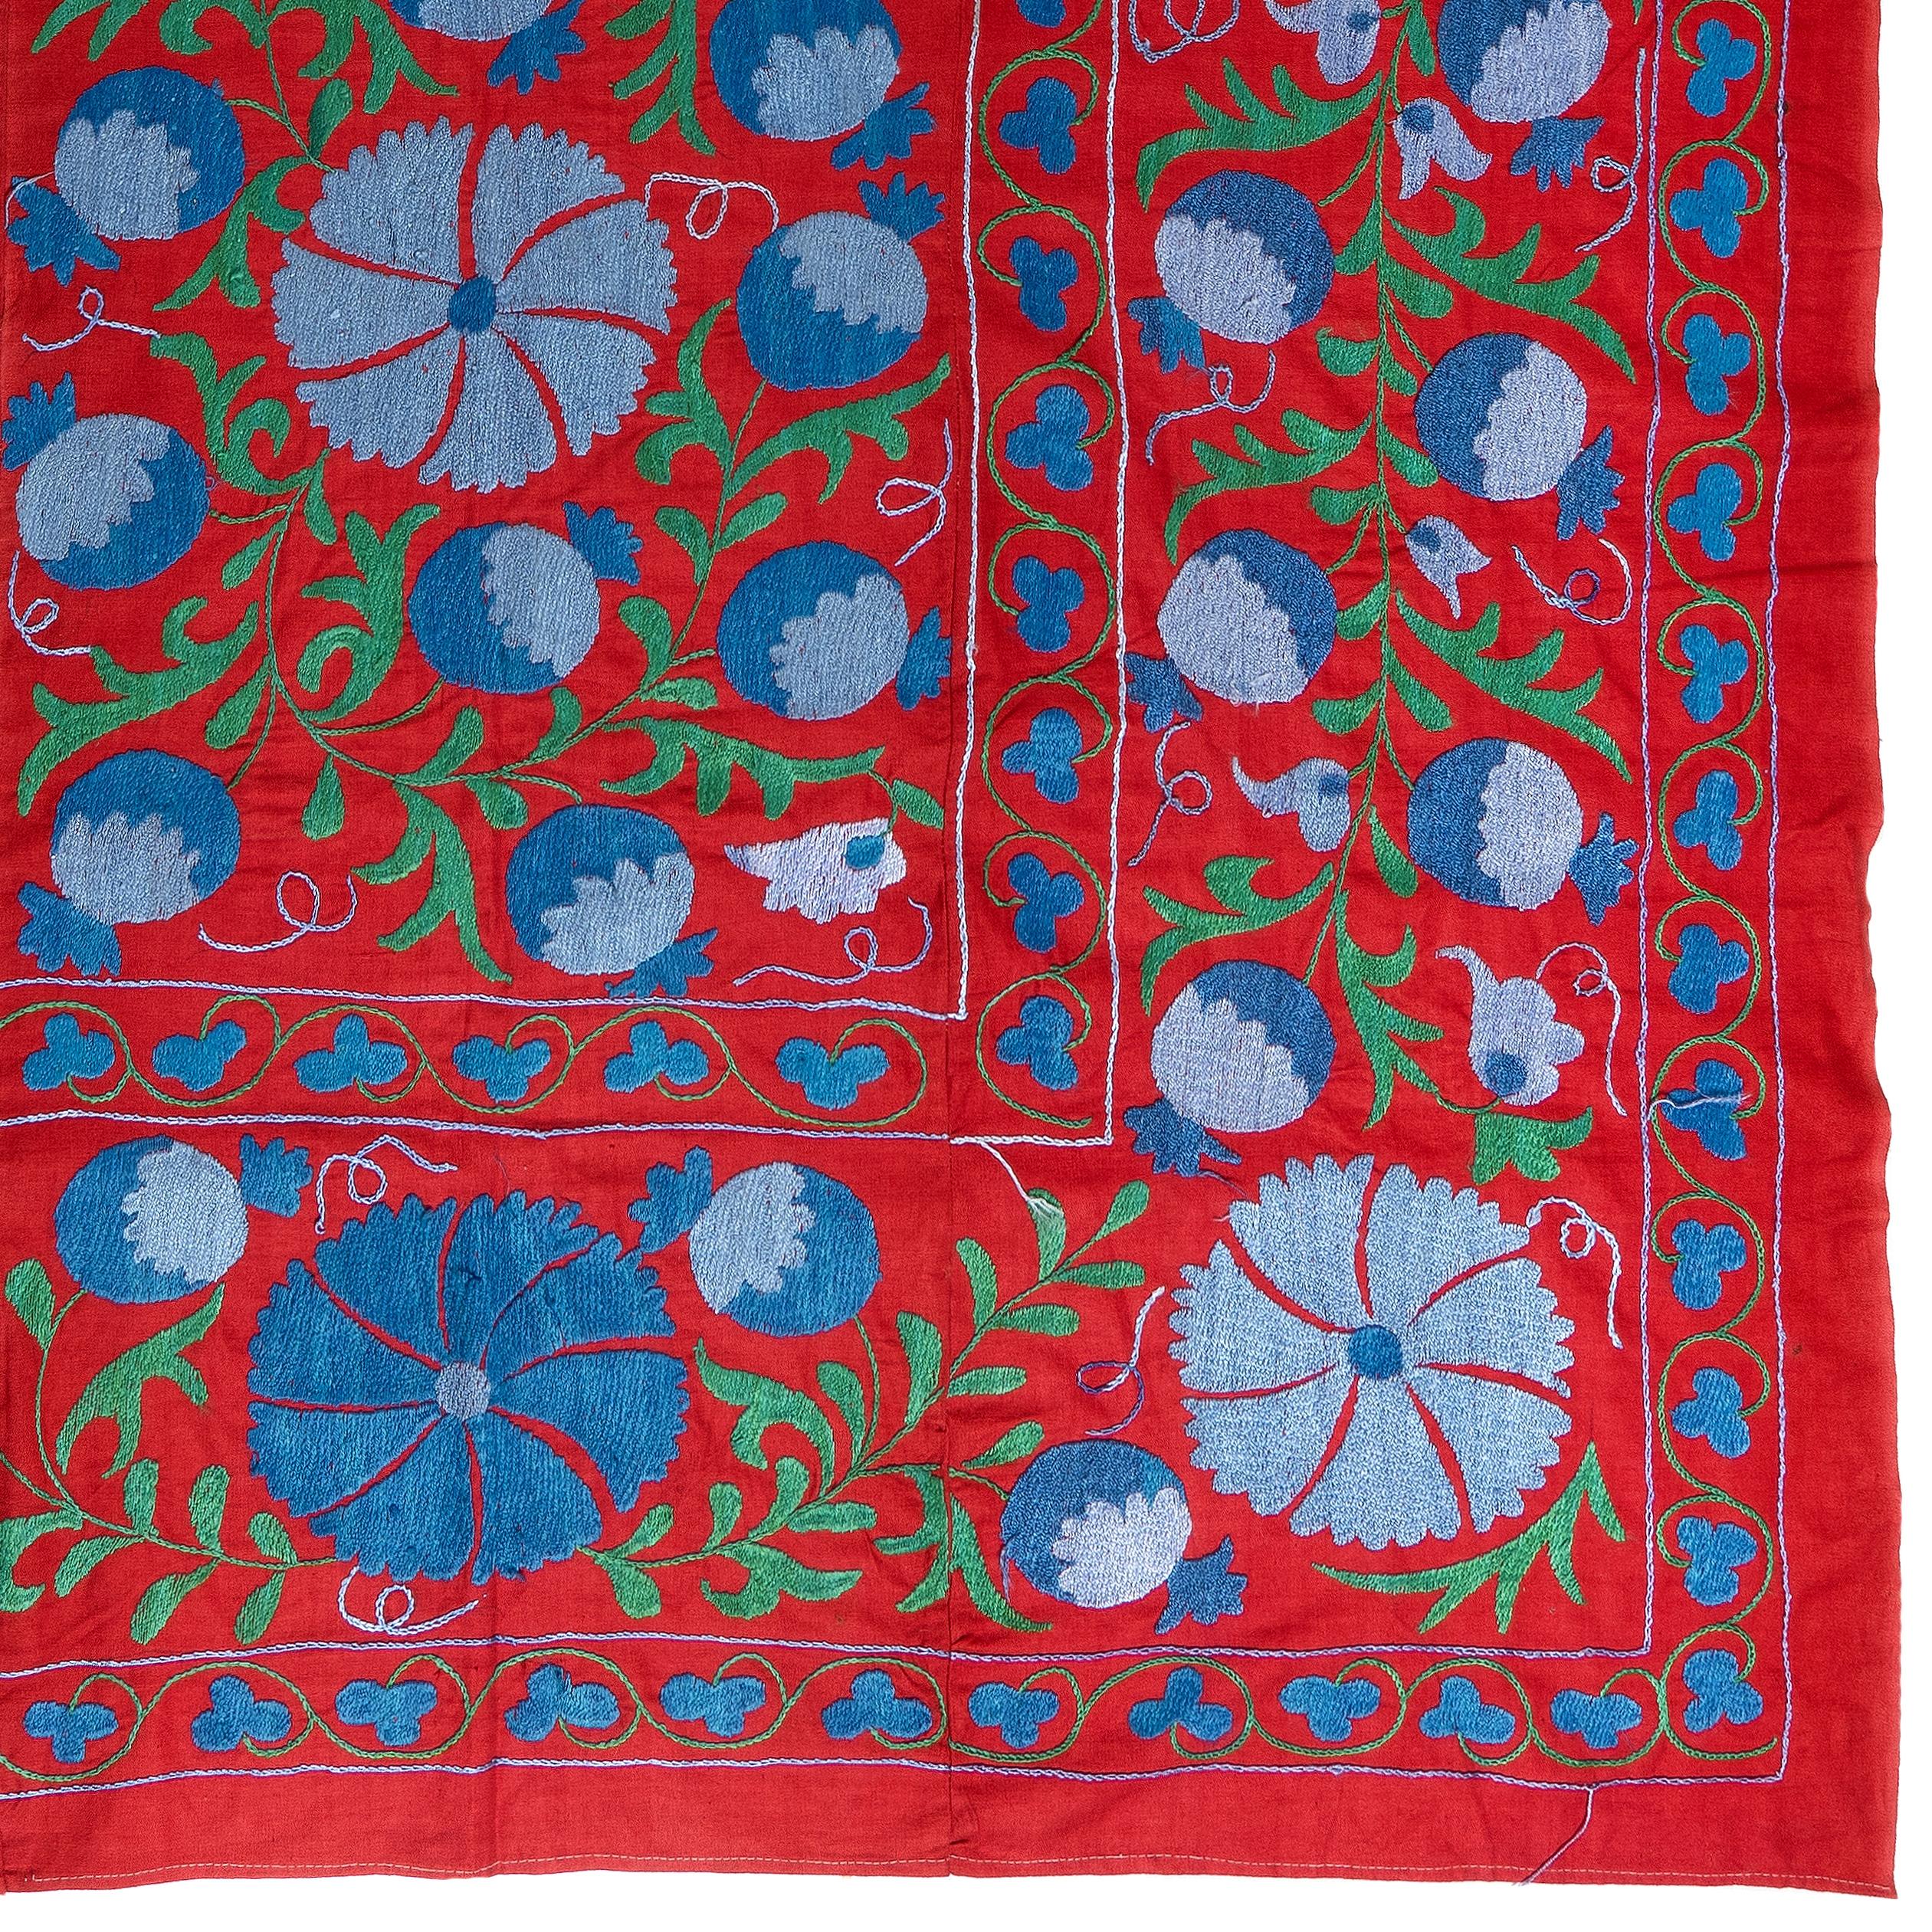 Embroidered 4.5x7 Ft Magnificent Silk Embroidery Suzani Wall Hanging in Red, Blue and Green For Sale